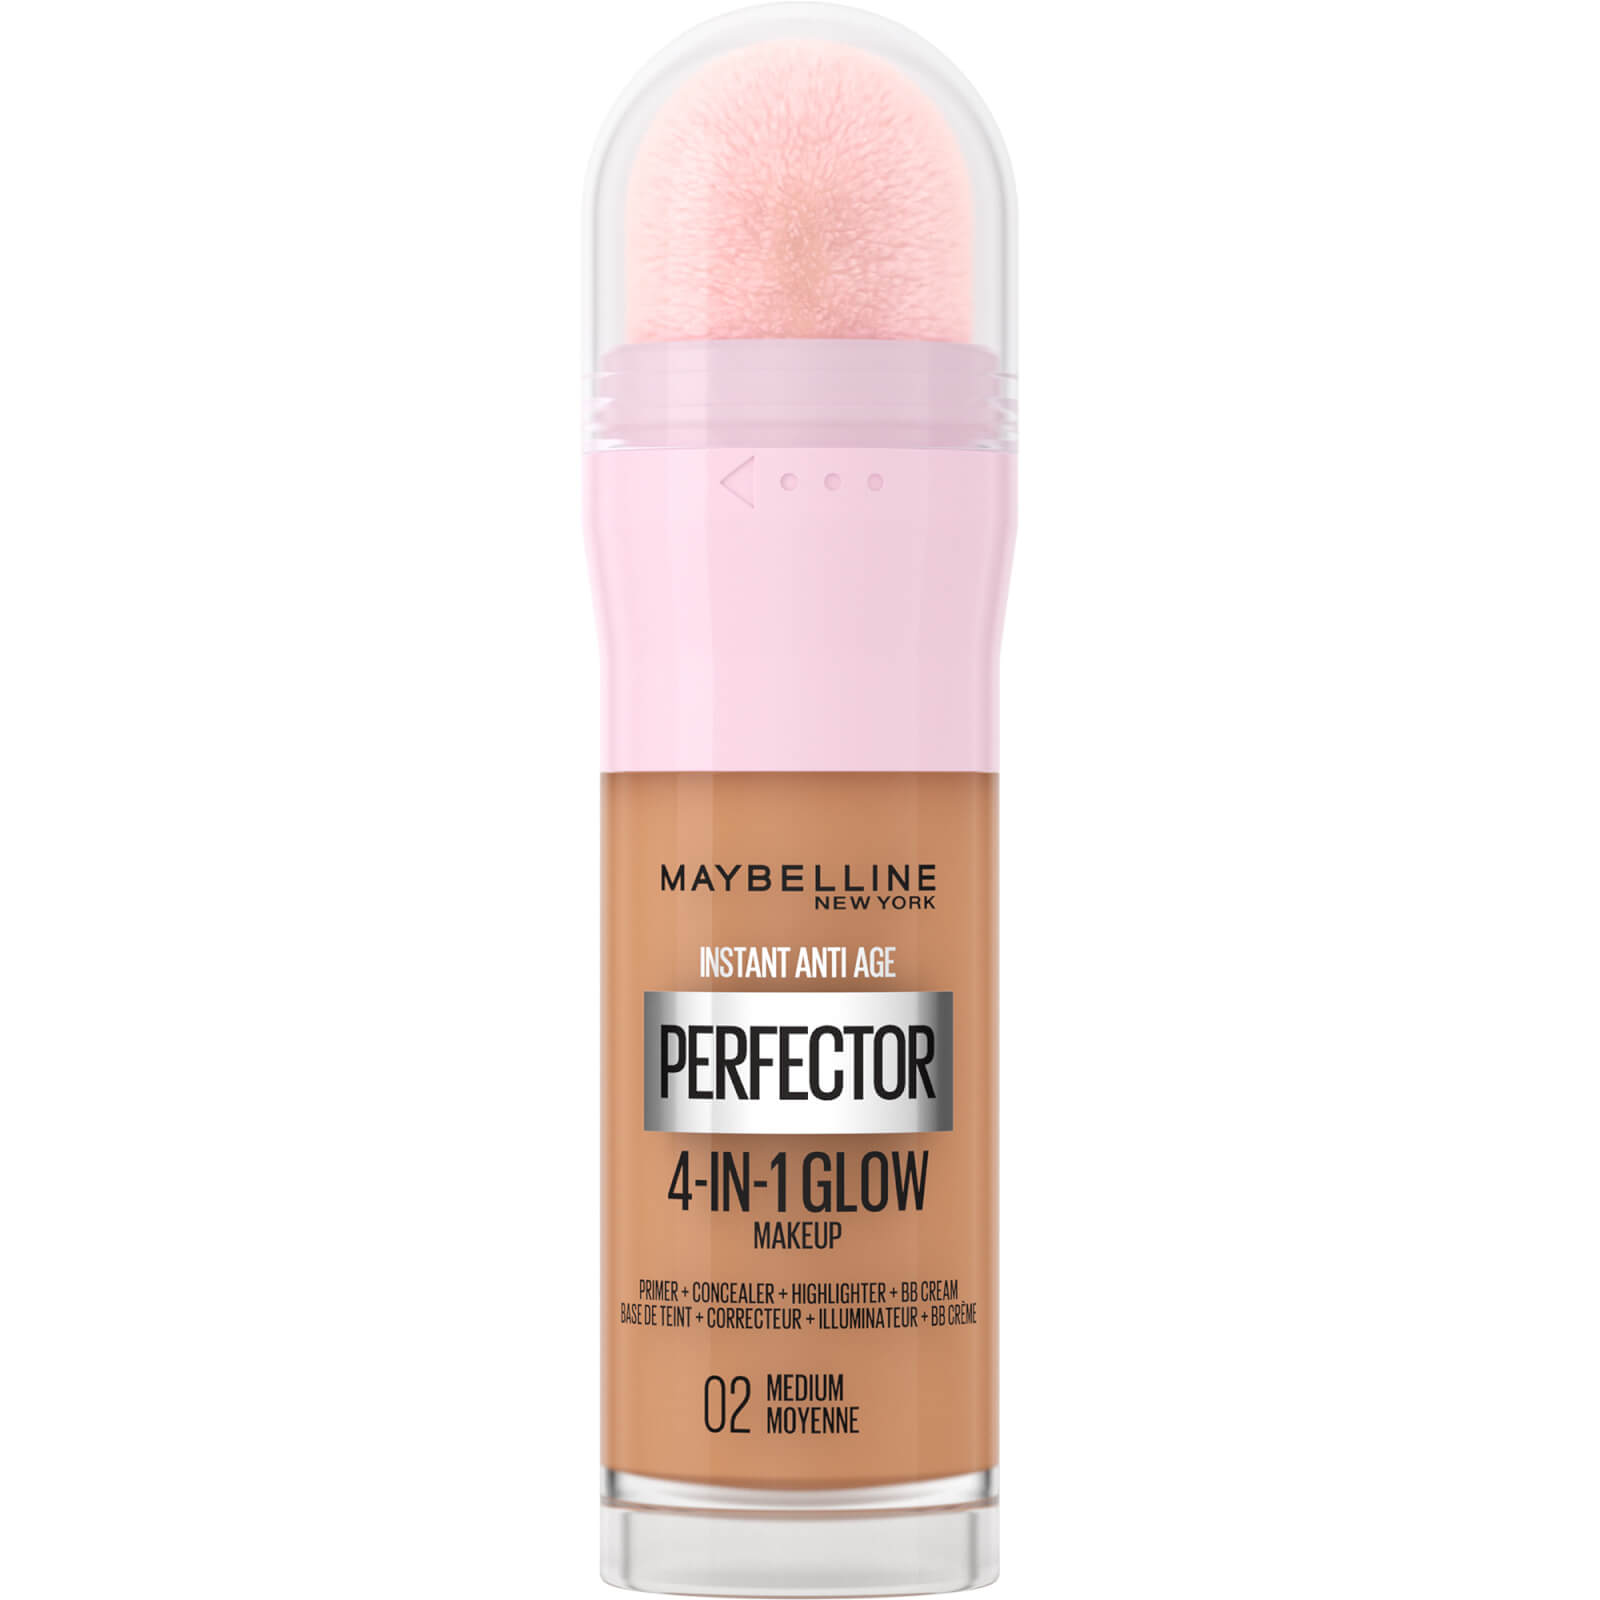 Photos - Other Cosmetics Maybelline Instant Anti Age Perfector 4-in-1 Glow Primer, Concealer, Highl 